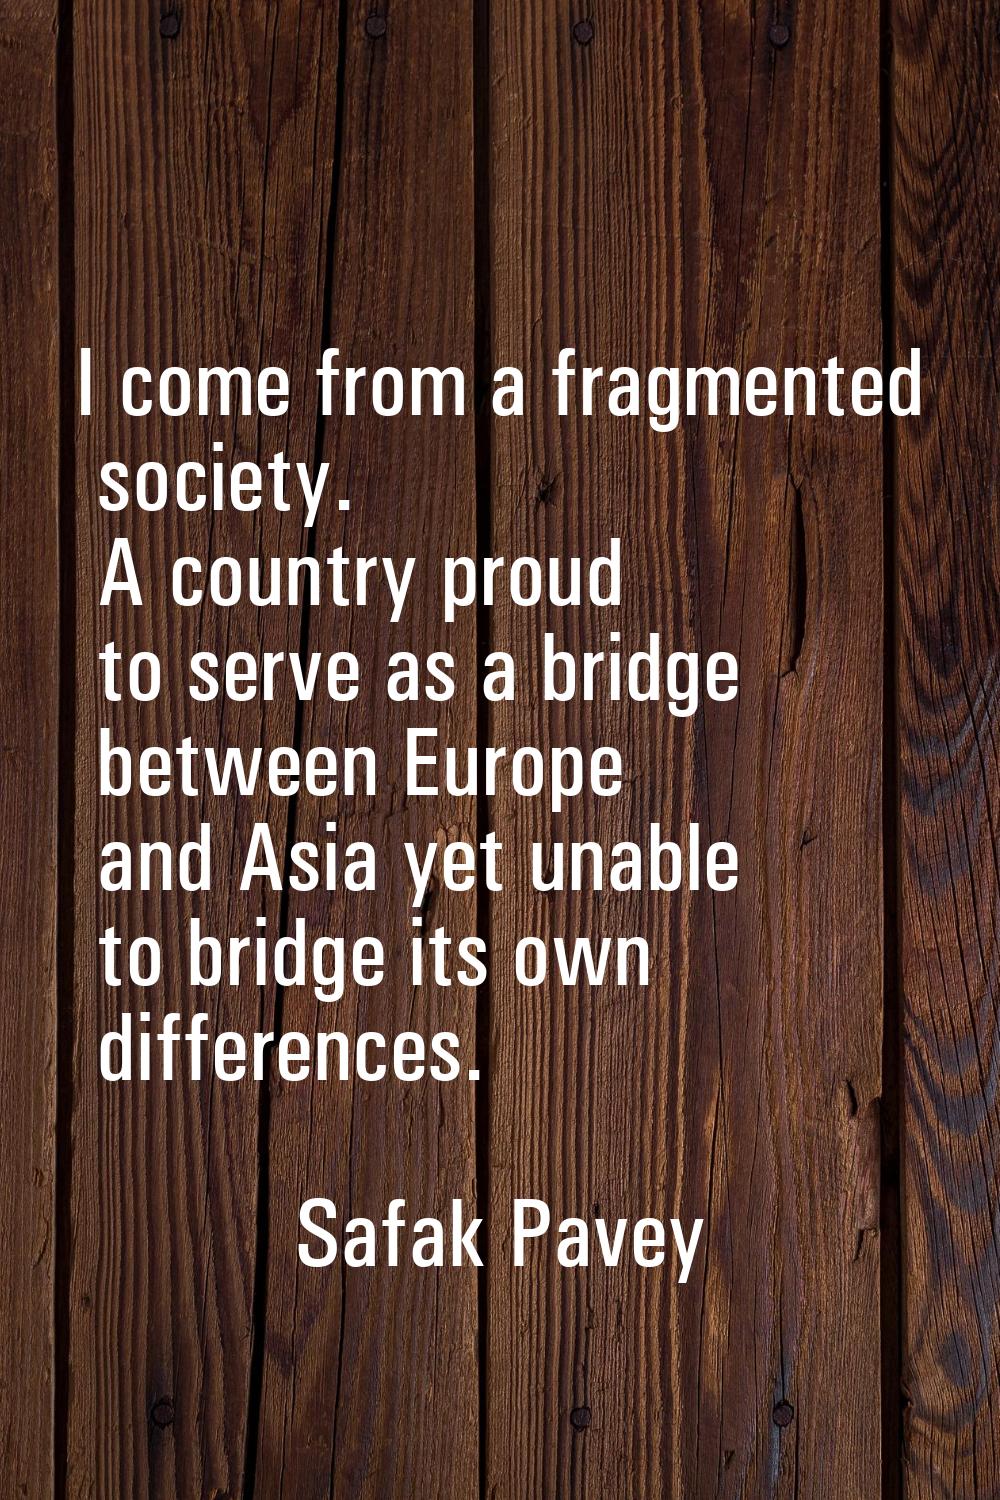 I come from a fragmented society. A country proud to serve as a bridge between Europe and Asia yet 